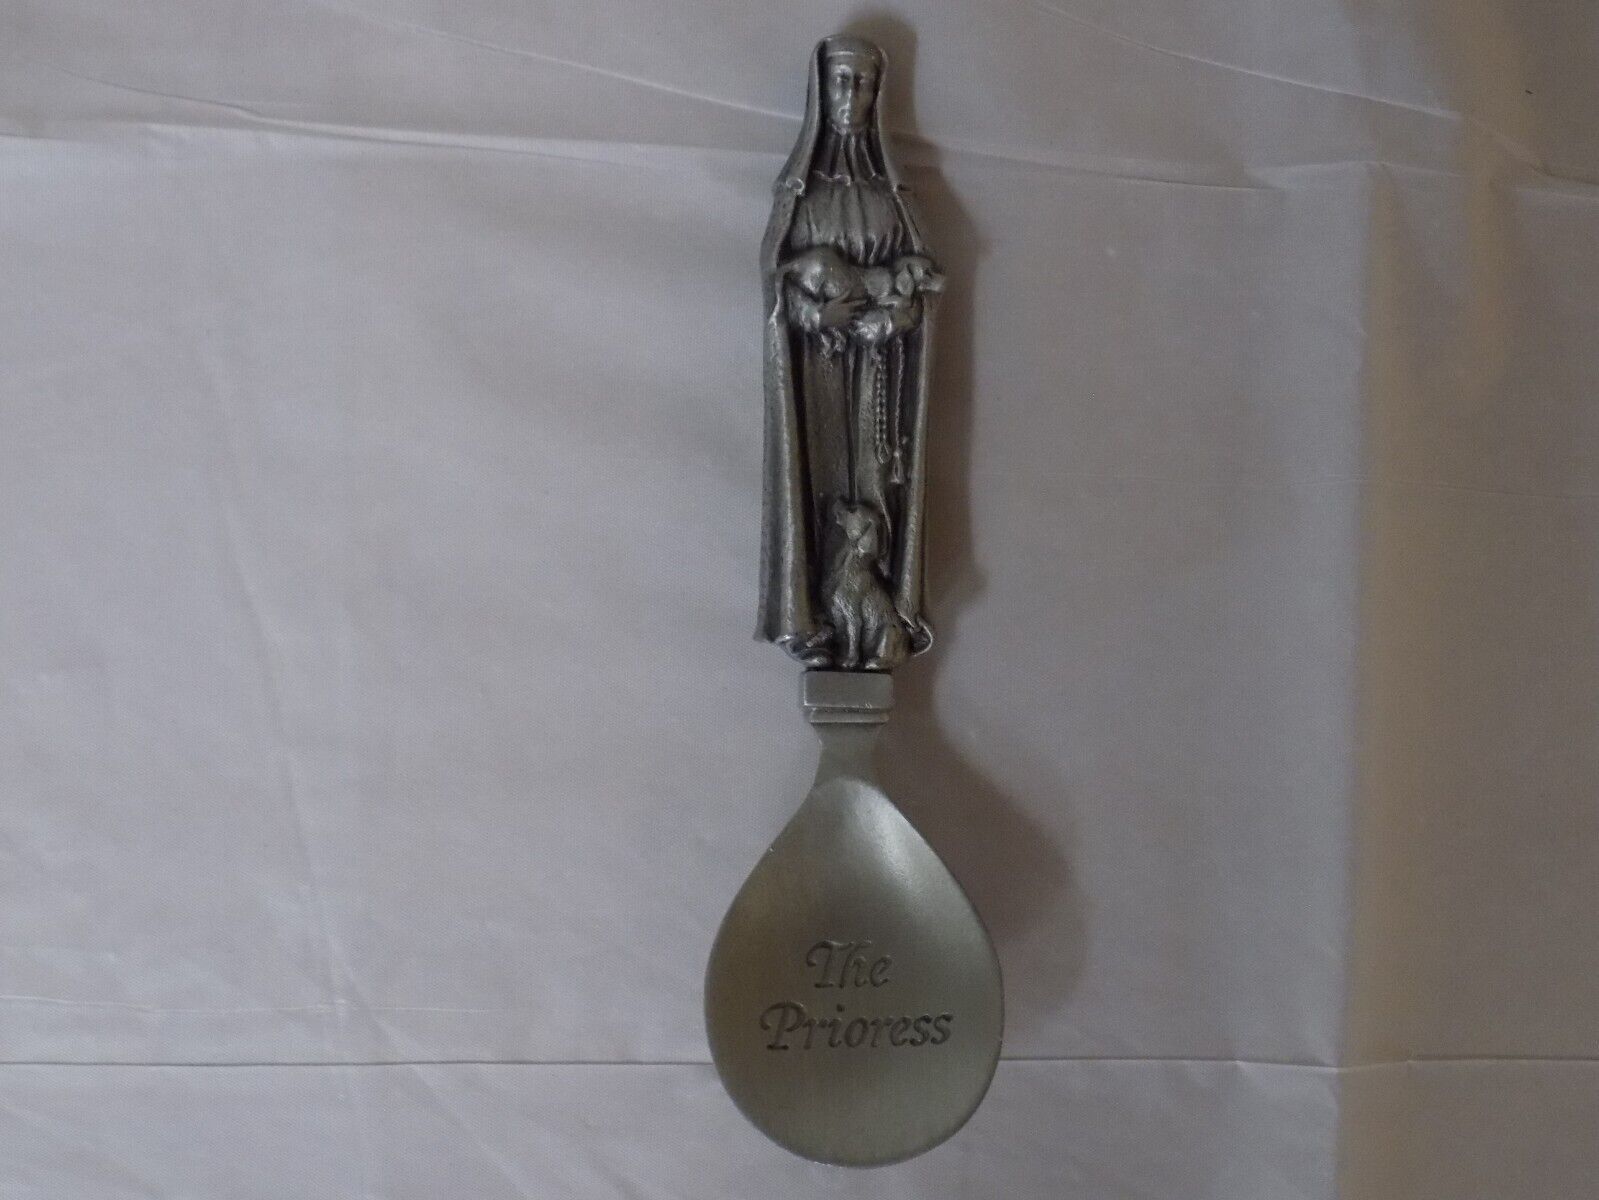 franklin mint pewter spoon canterbury tales the Prioress 1977